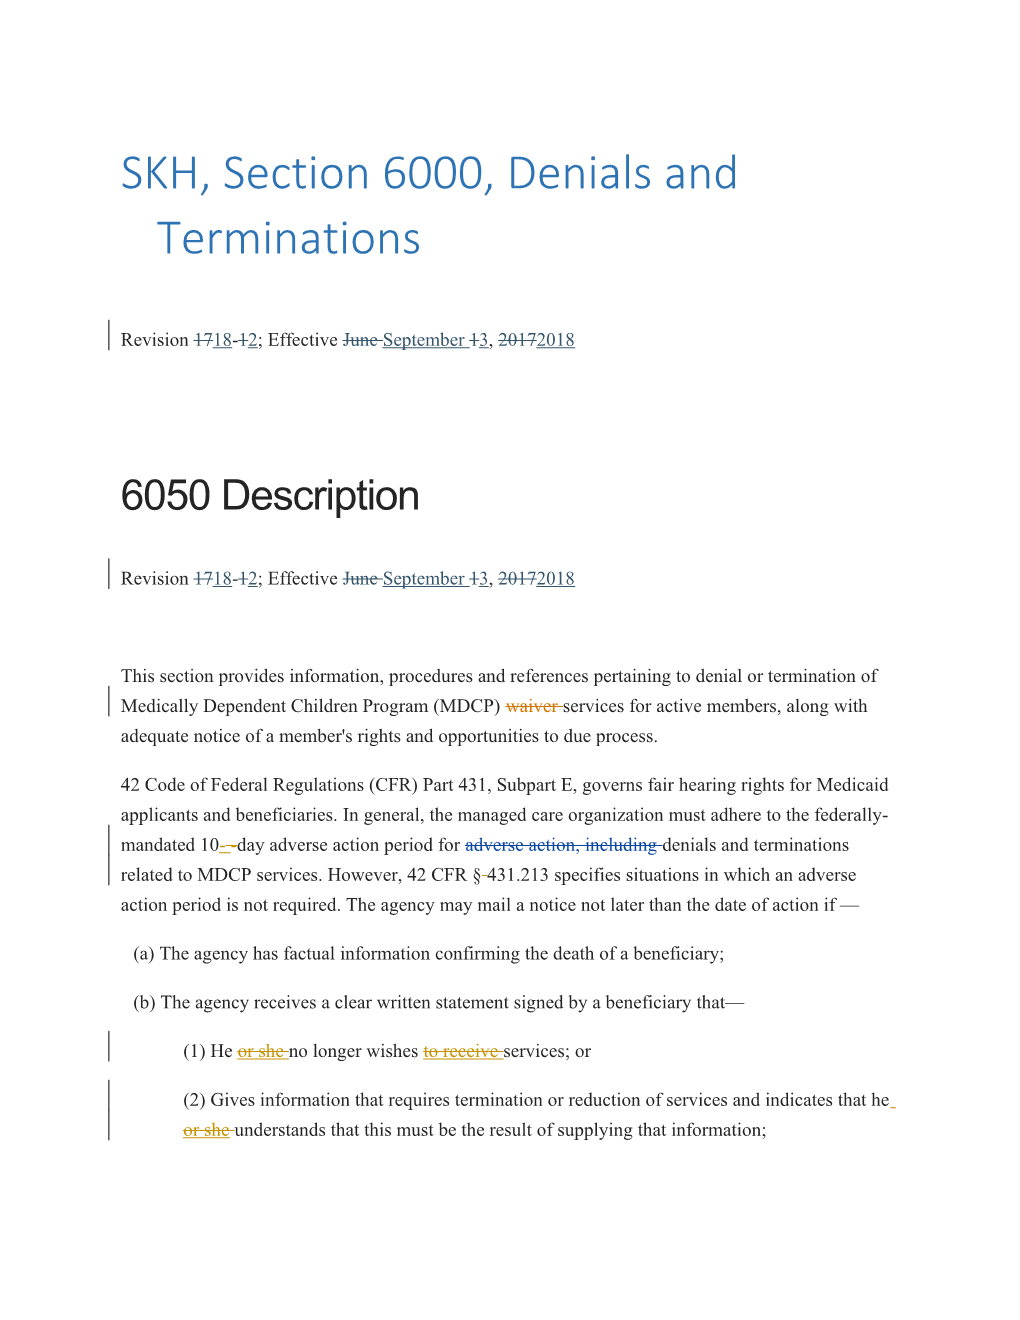 SKH, Section 6000, Denials and Terminations